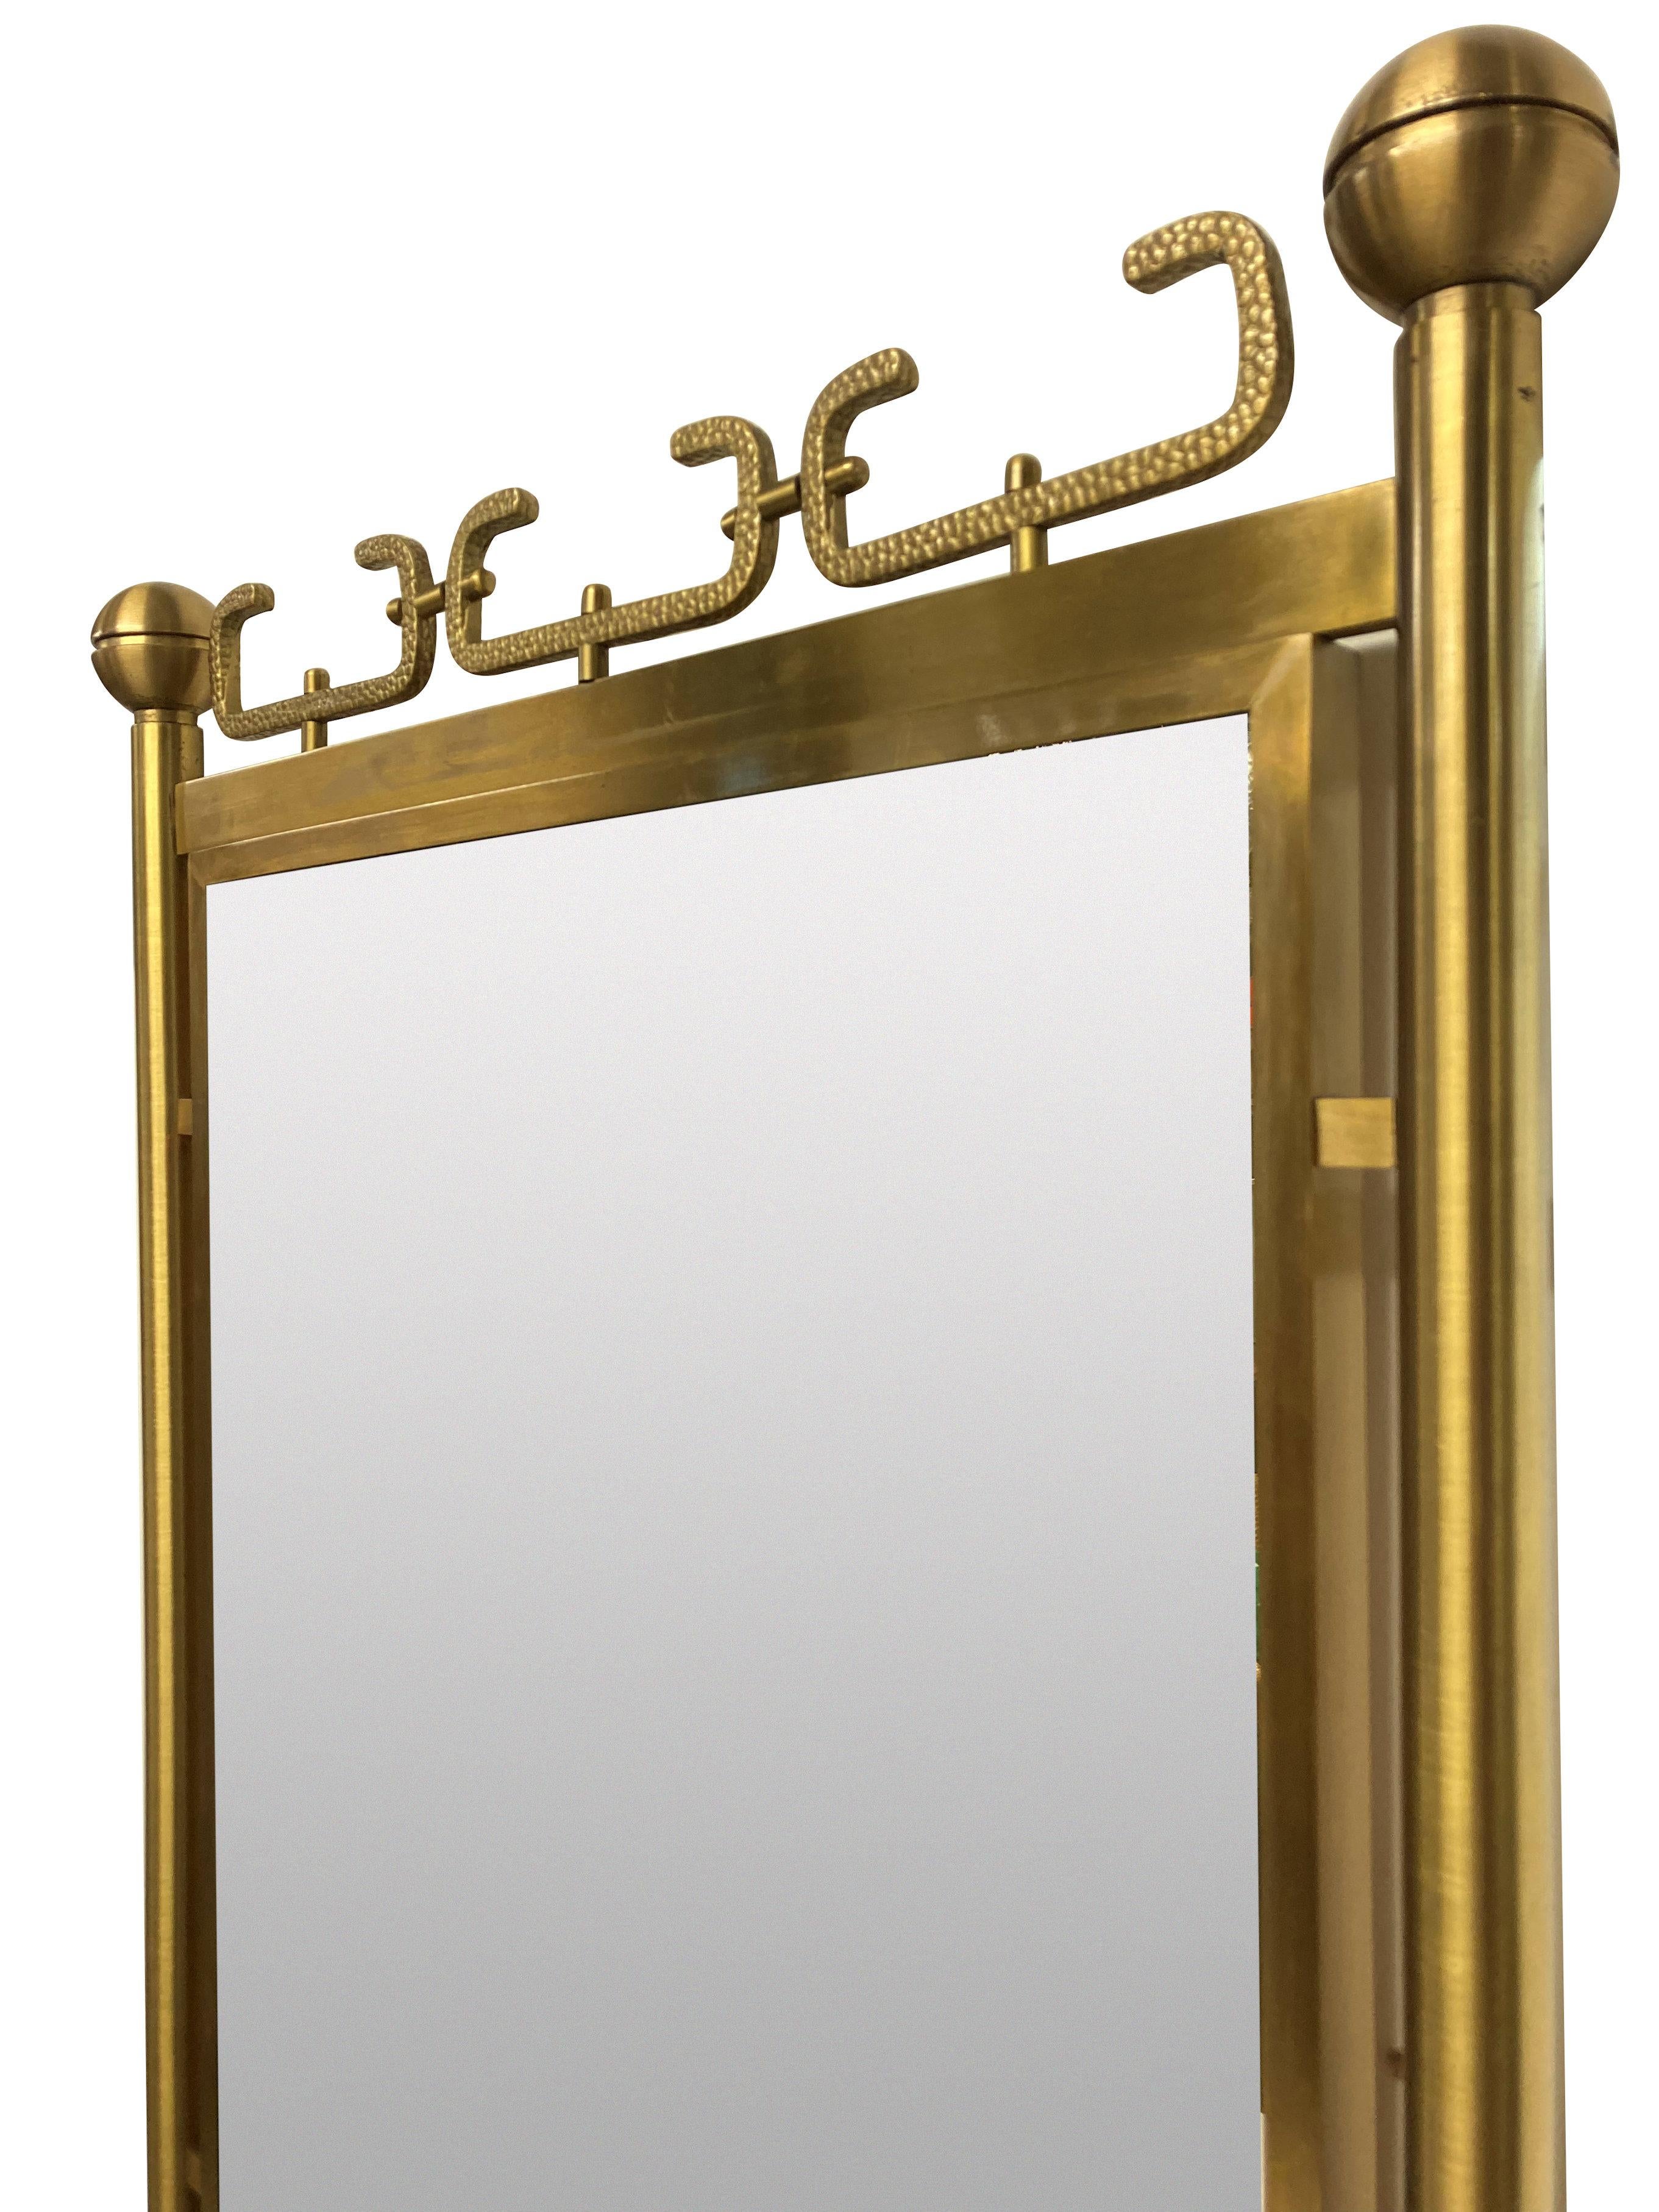 An Italian mid-century mirror of interesting design in brushed brass.